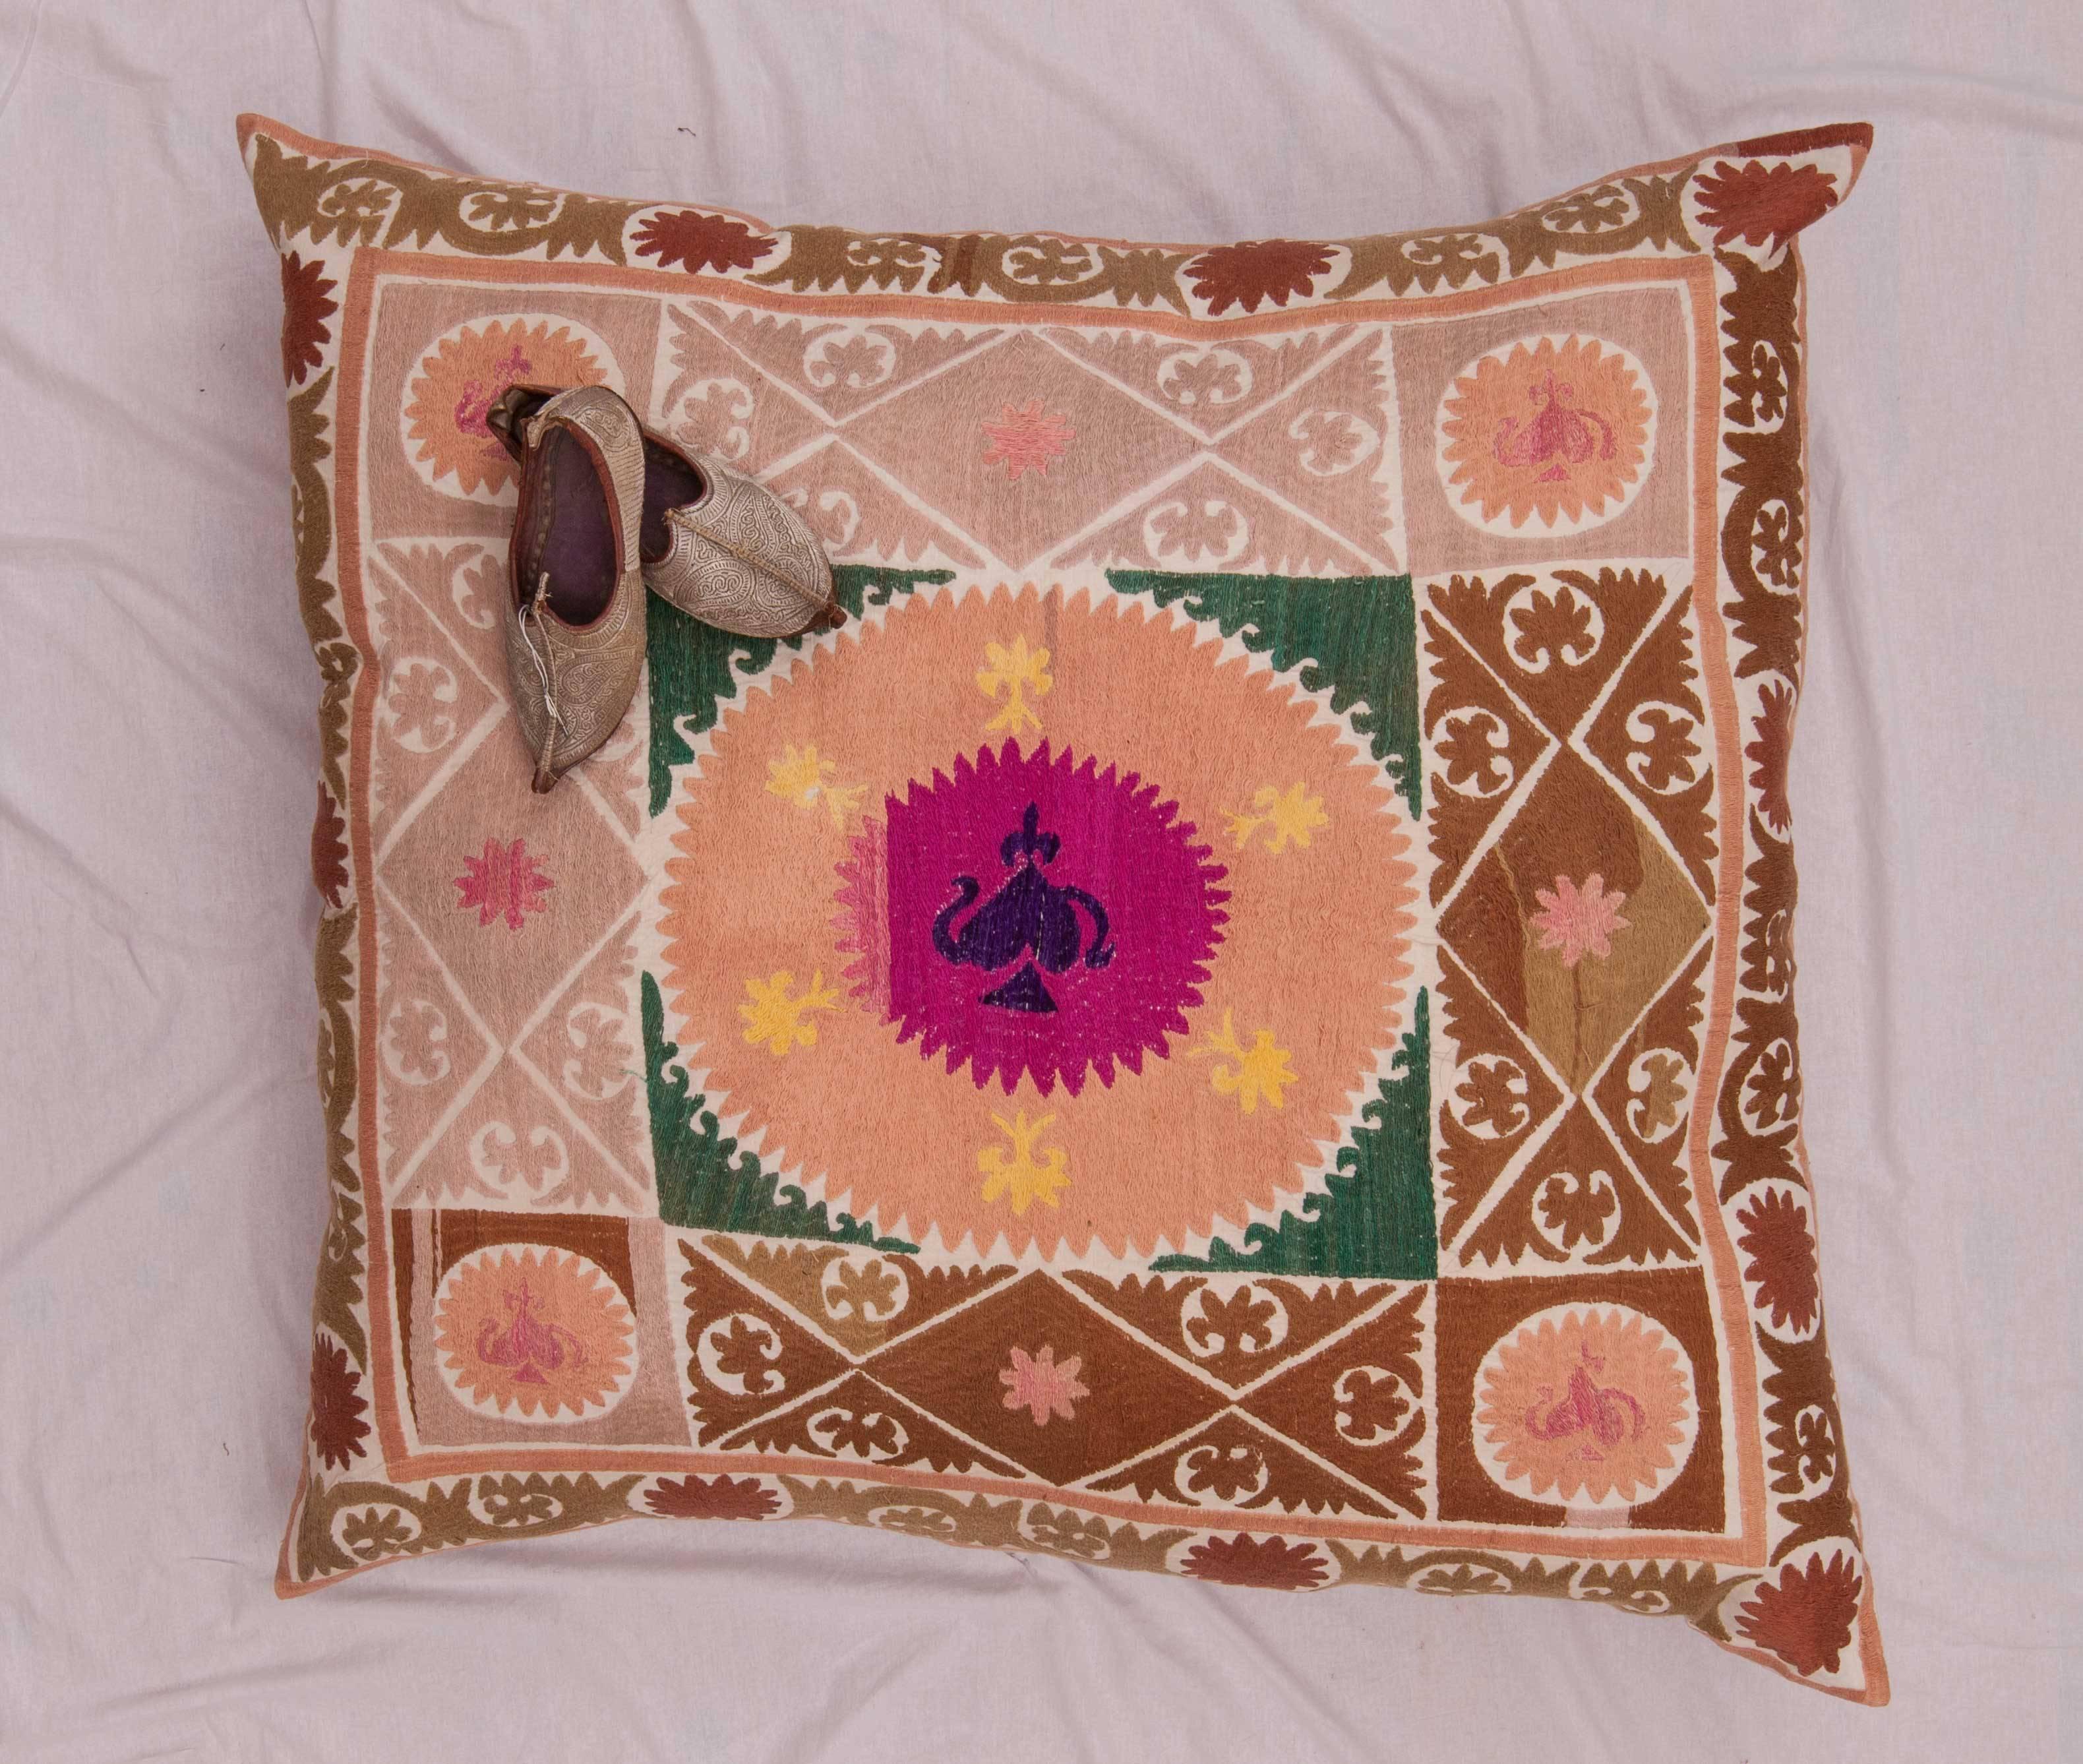 The pillow is made from a mid-20th century, Uzbek Samarkand Suzani. It does not come with an insert but it comes with a bag made to the size and out of cotton to accommodate the filling. The backing is made of pure linen.
Please note: filling is